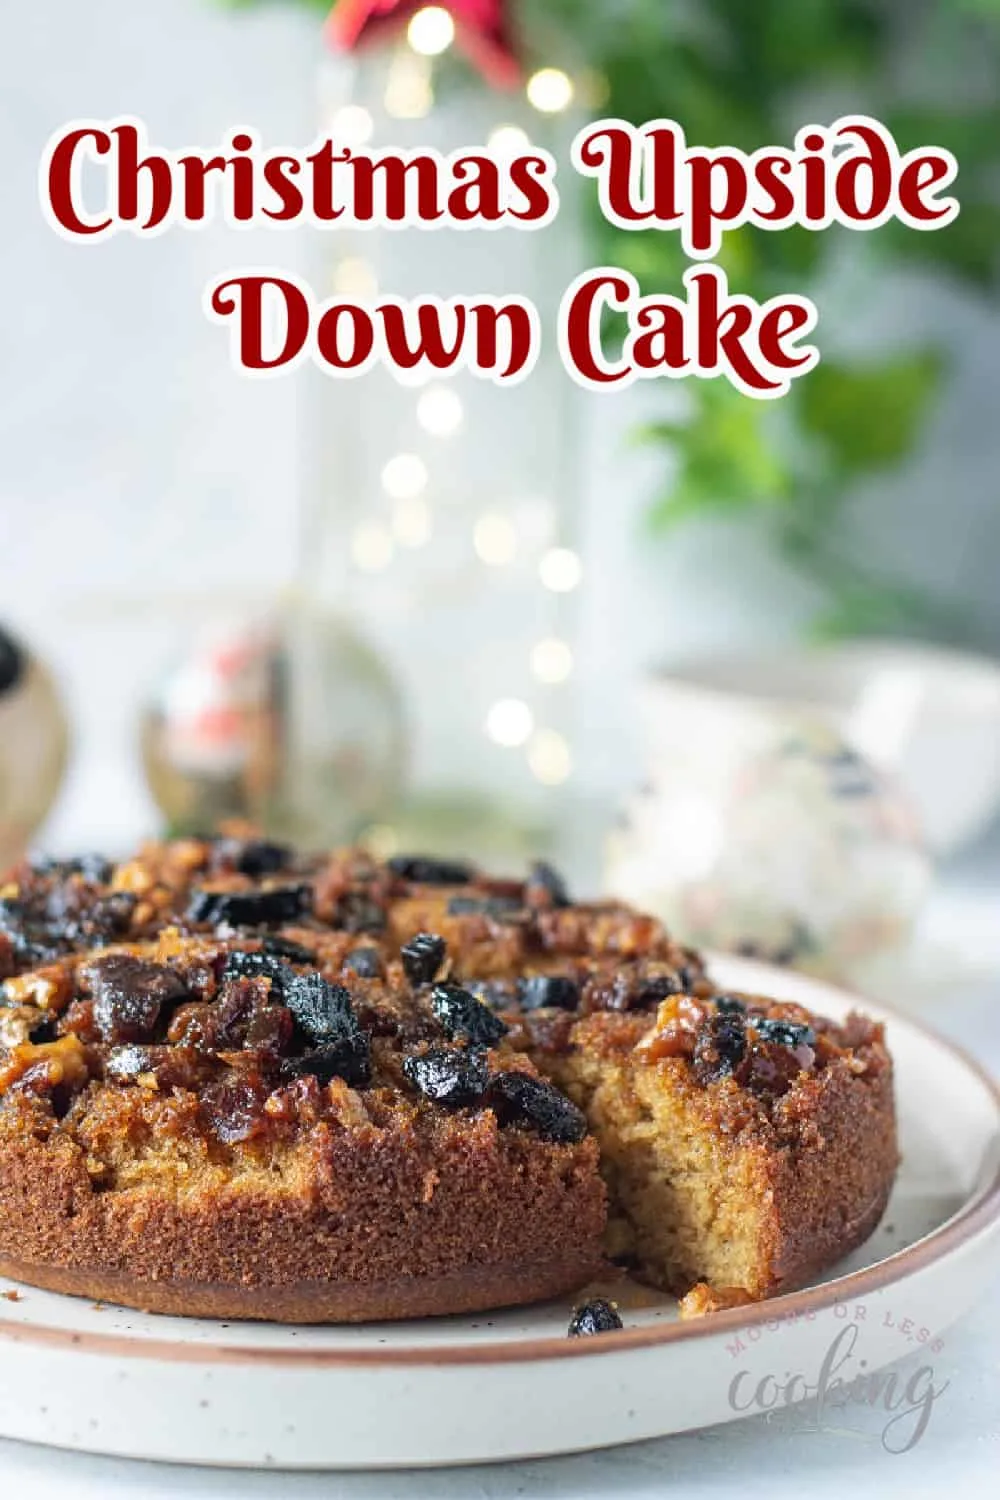 This festive upside-down Christmas cake makes a delicious coffee cake dessert. Spiced with a cinnamon, nutmeg, and cloves batter, this cake features a fruit and nut topping that's a perfect pairing for this delectable holiday dessert. via @Mooreorlesscook